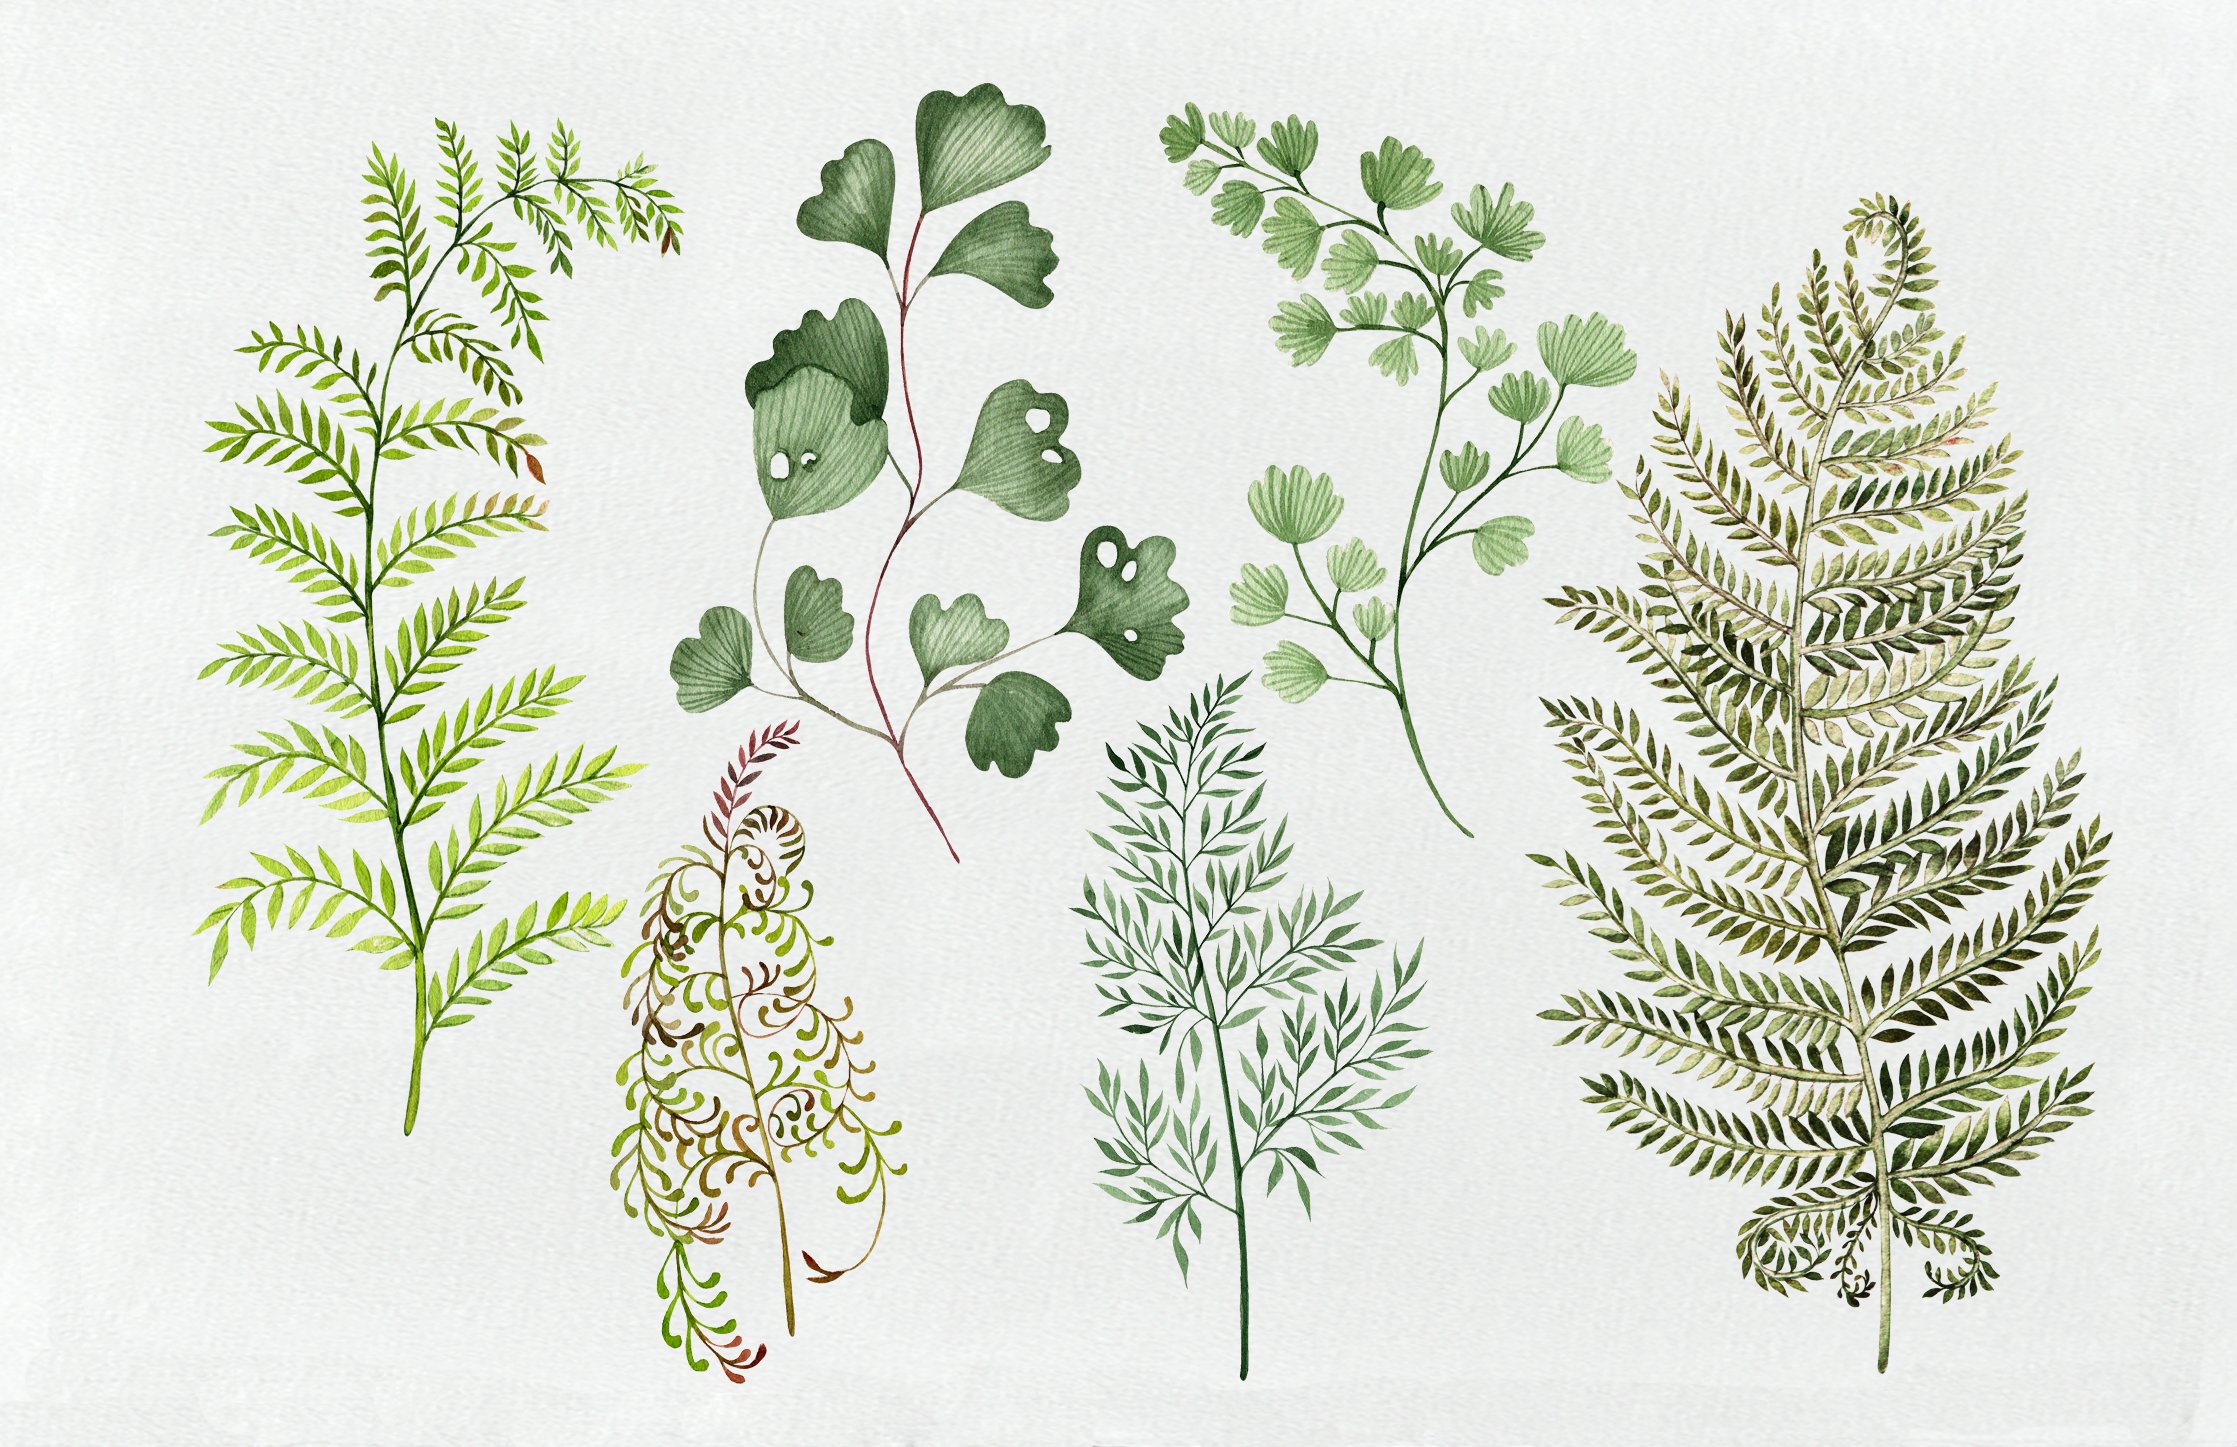 Bunch of different types of plants on a white background.